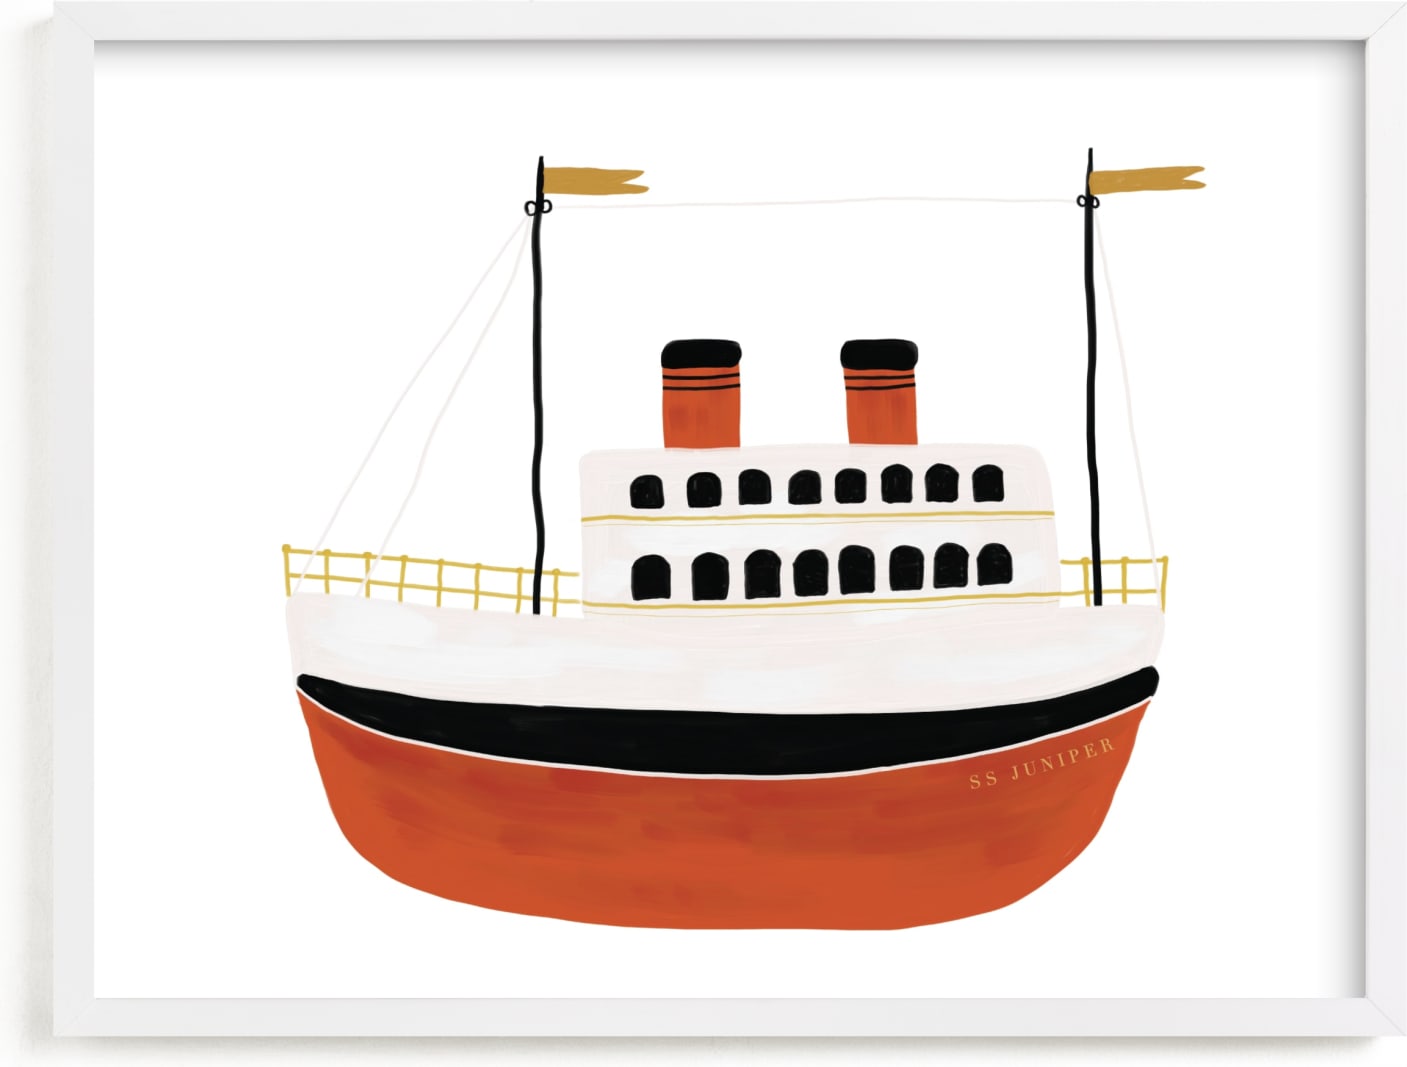 This is a black personalized art for kid by Maja Cunningham called Schooner II.